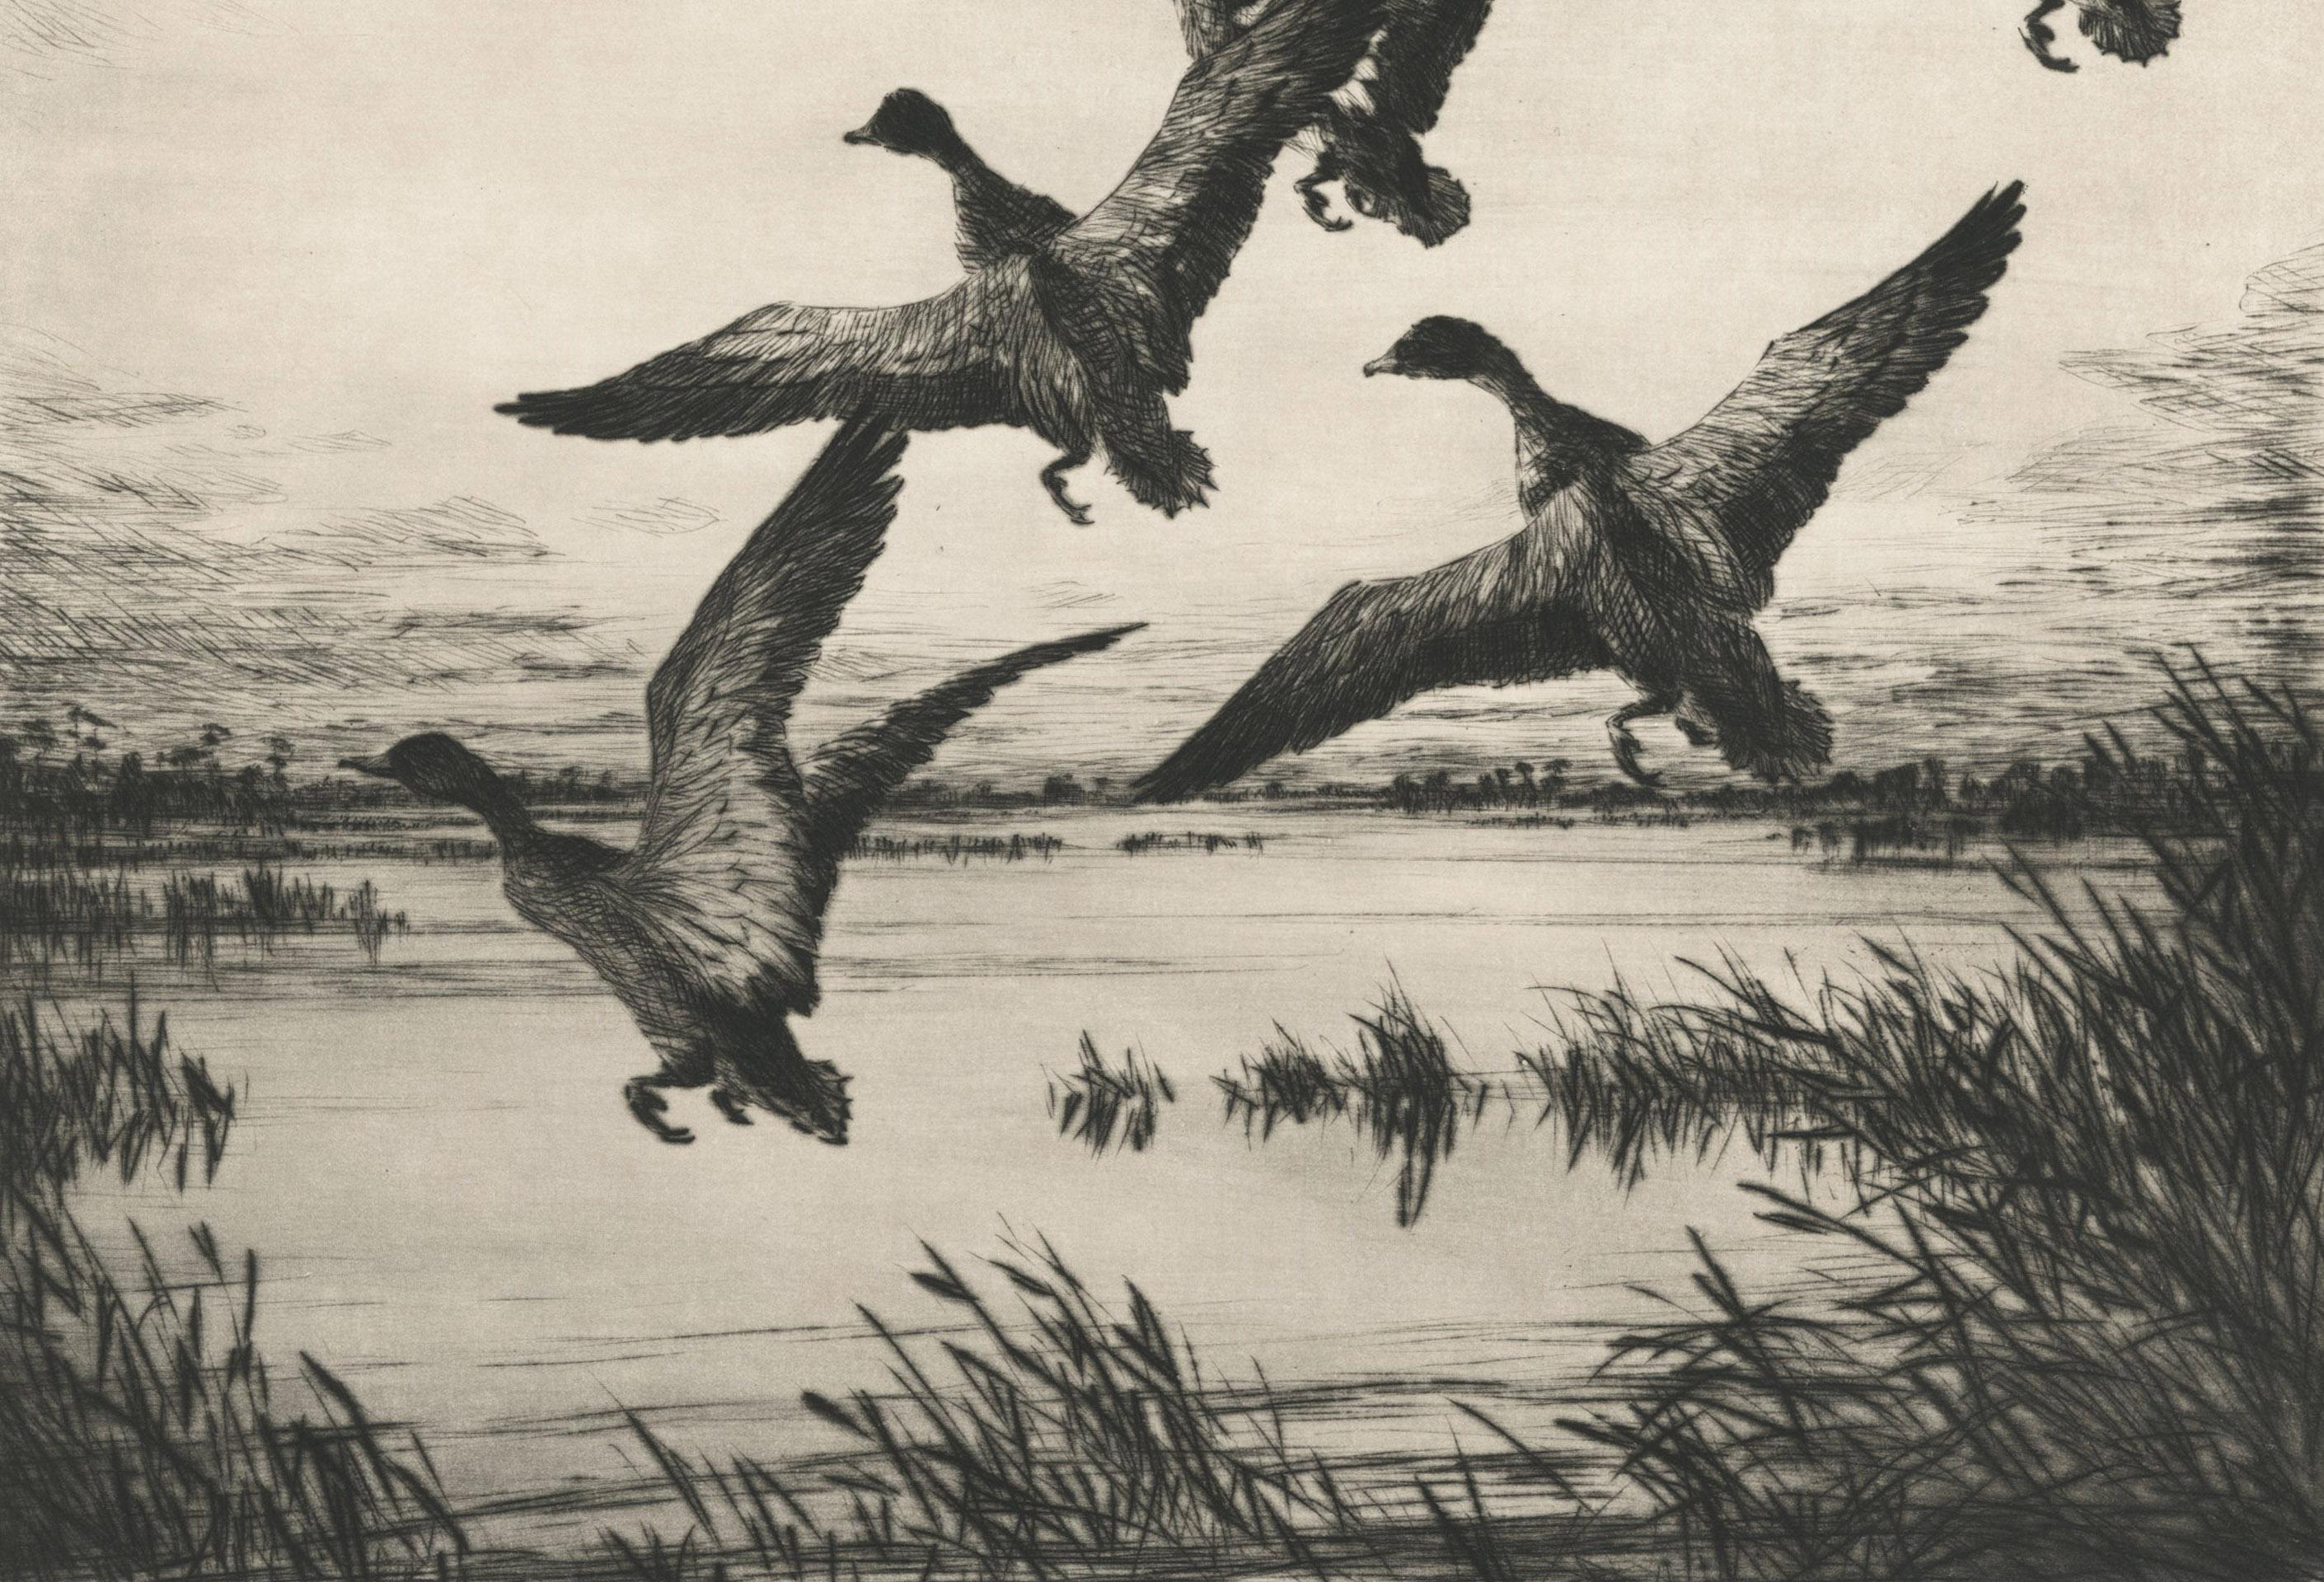 Black Ducks (Marsh Ducks)
Etching, 1964
Signed in pencil lower right
Titled in pencil lower left
Edition: 250
Published by Associated American Artist, New York
Illustrated: AAA catalogs 1964-08 and 1966-08
Condition: Excellent
Image/Plate size: 11